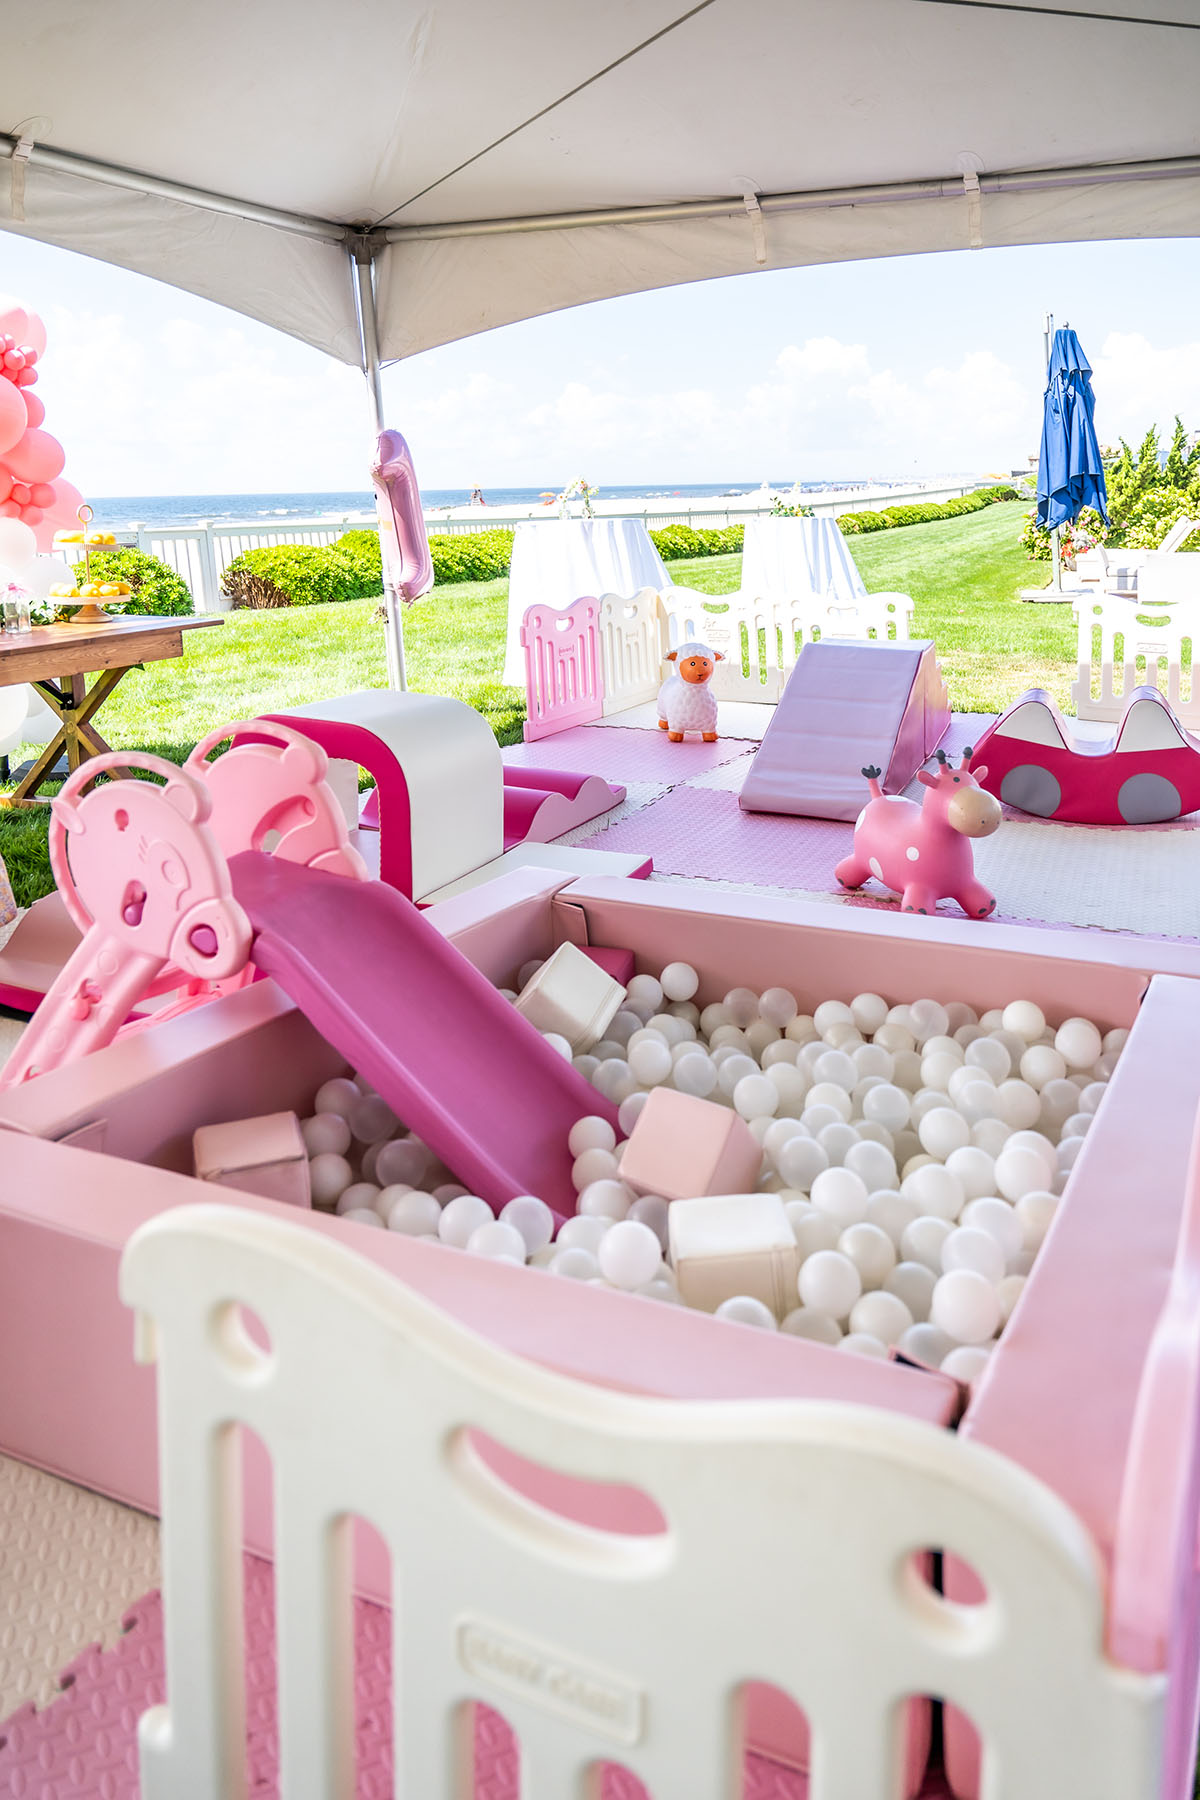 pink ball pool with slide under pavillon